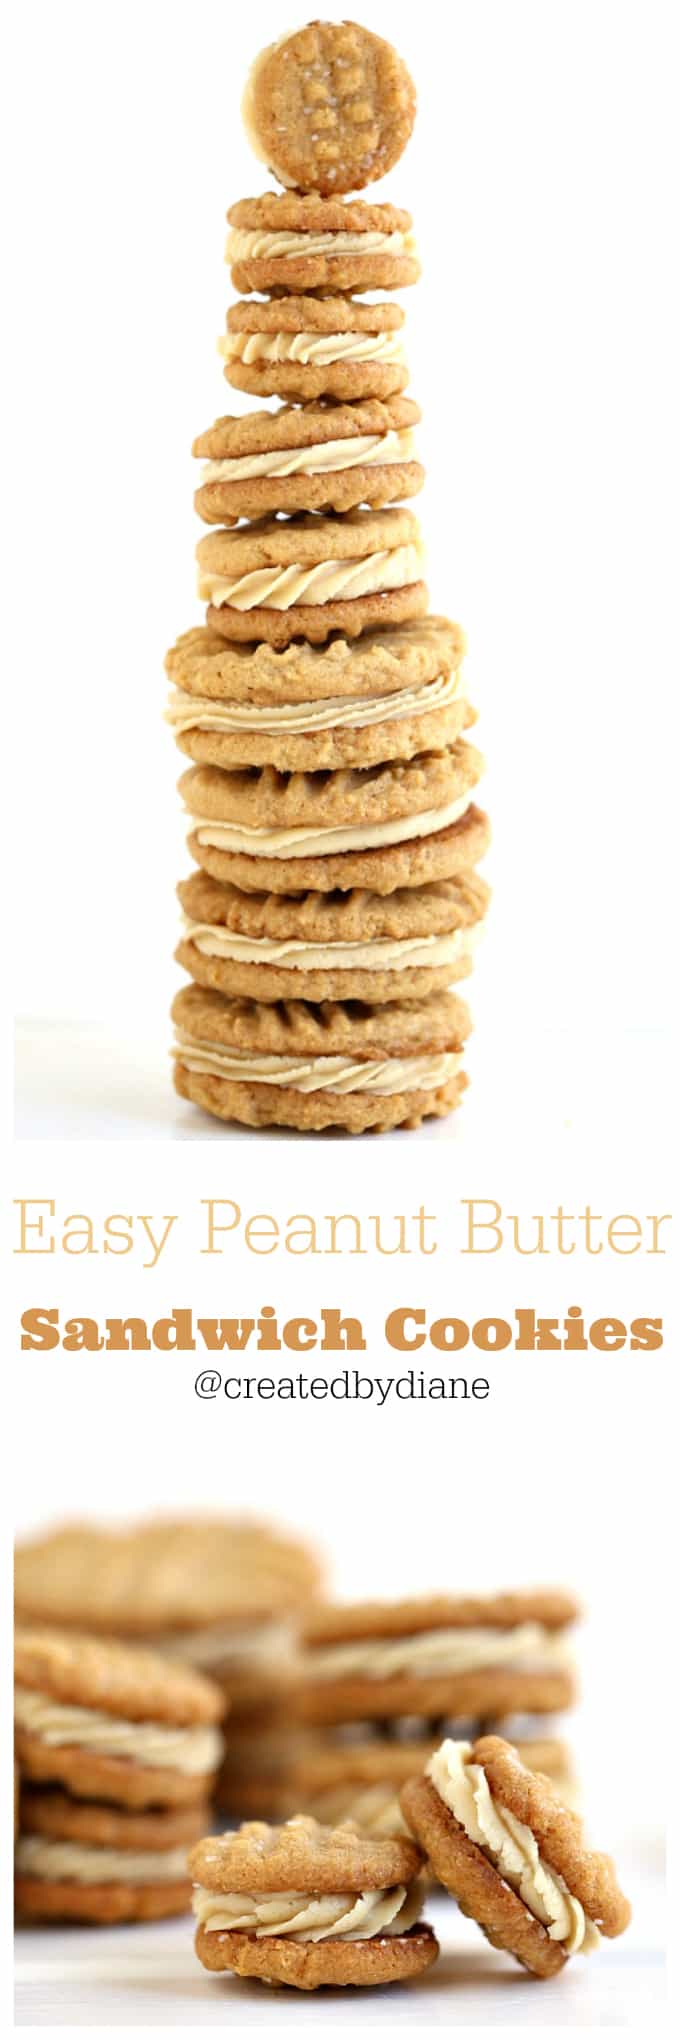 3 ingredient peanut butter cookies filled with peanut butter frosting @creaetedbydiane